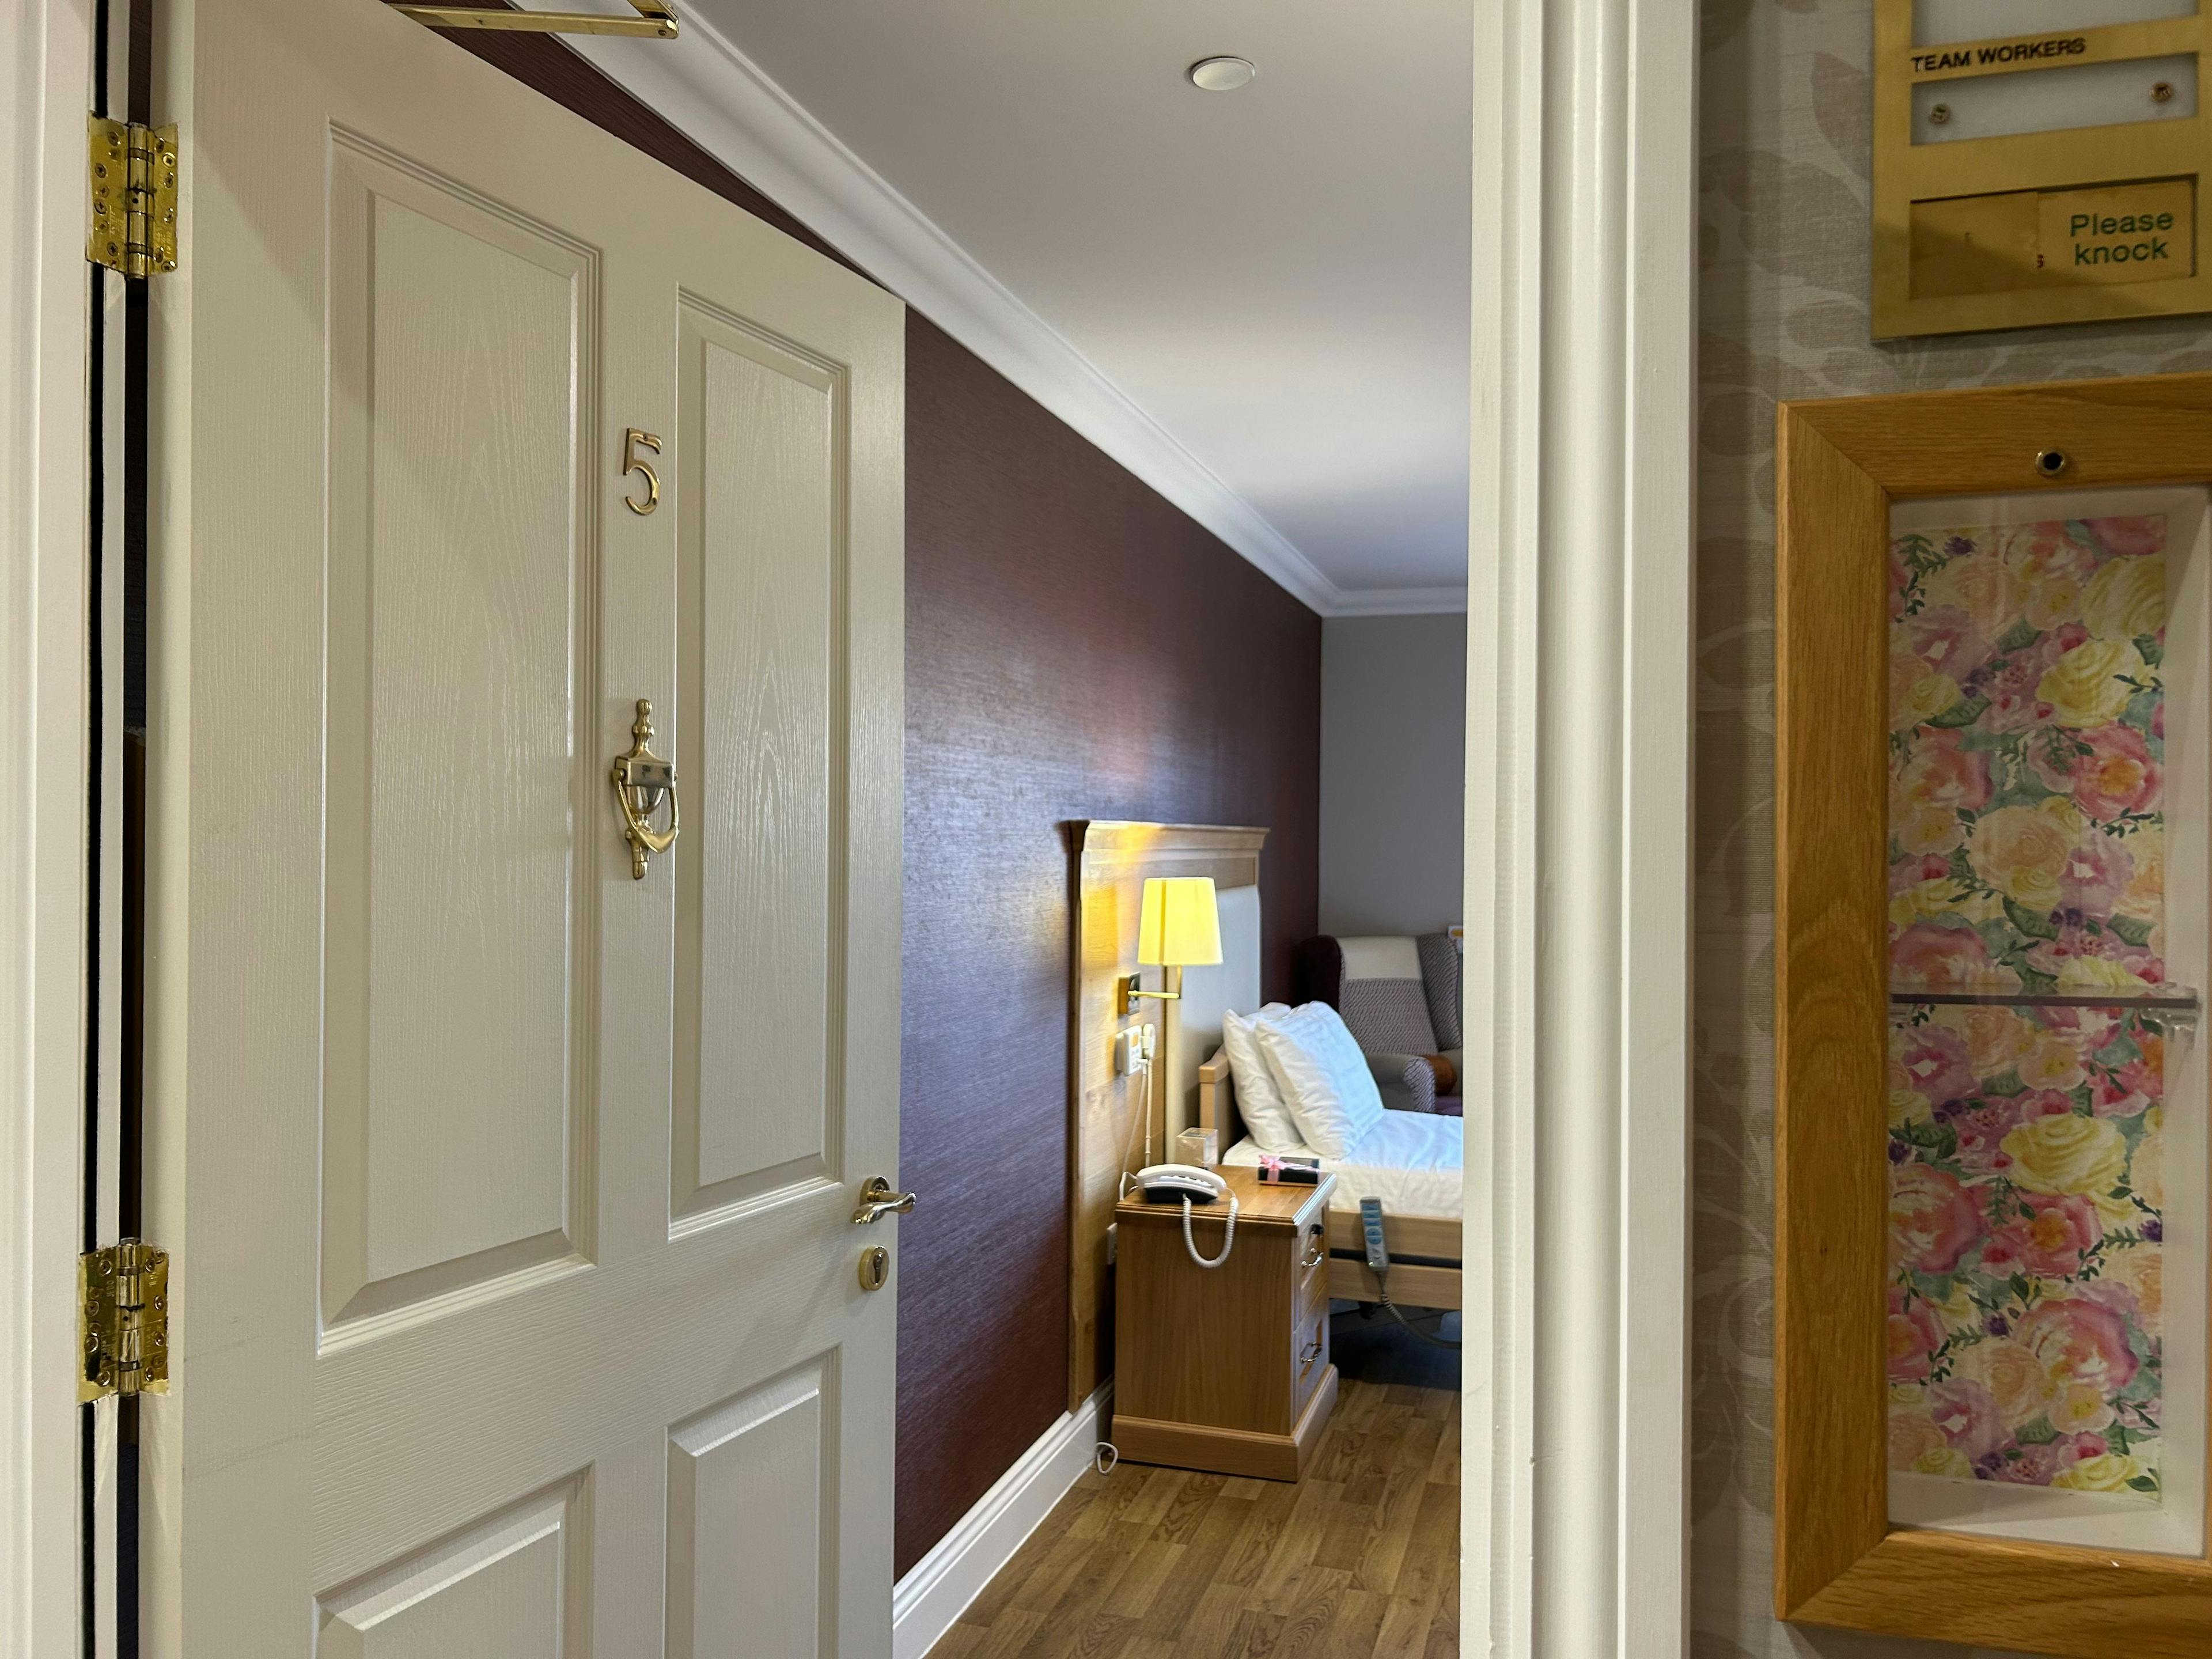 Bedroom of Cuffley Manor care home in Potters Bar, Hertfordshire